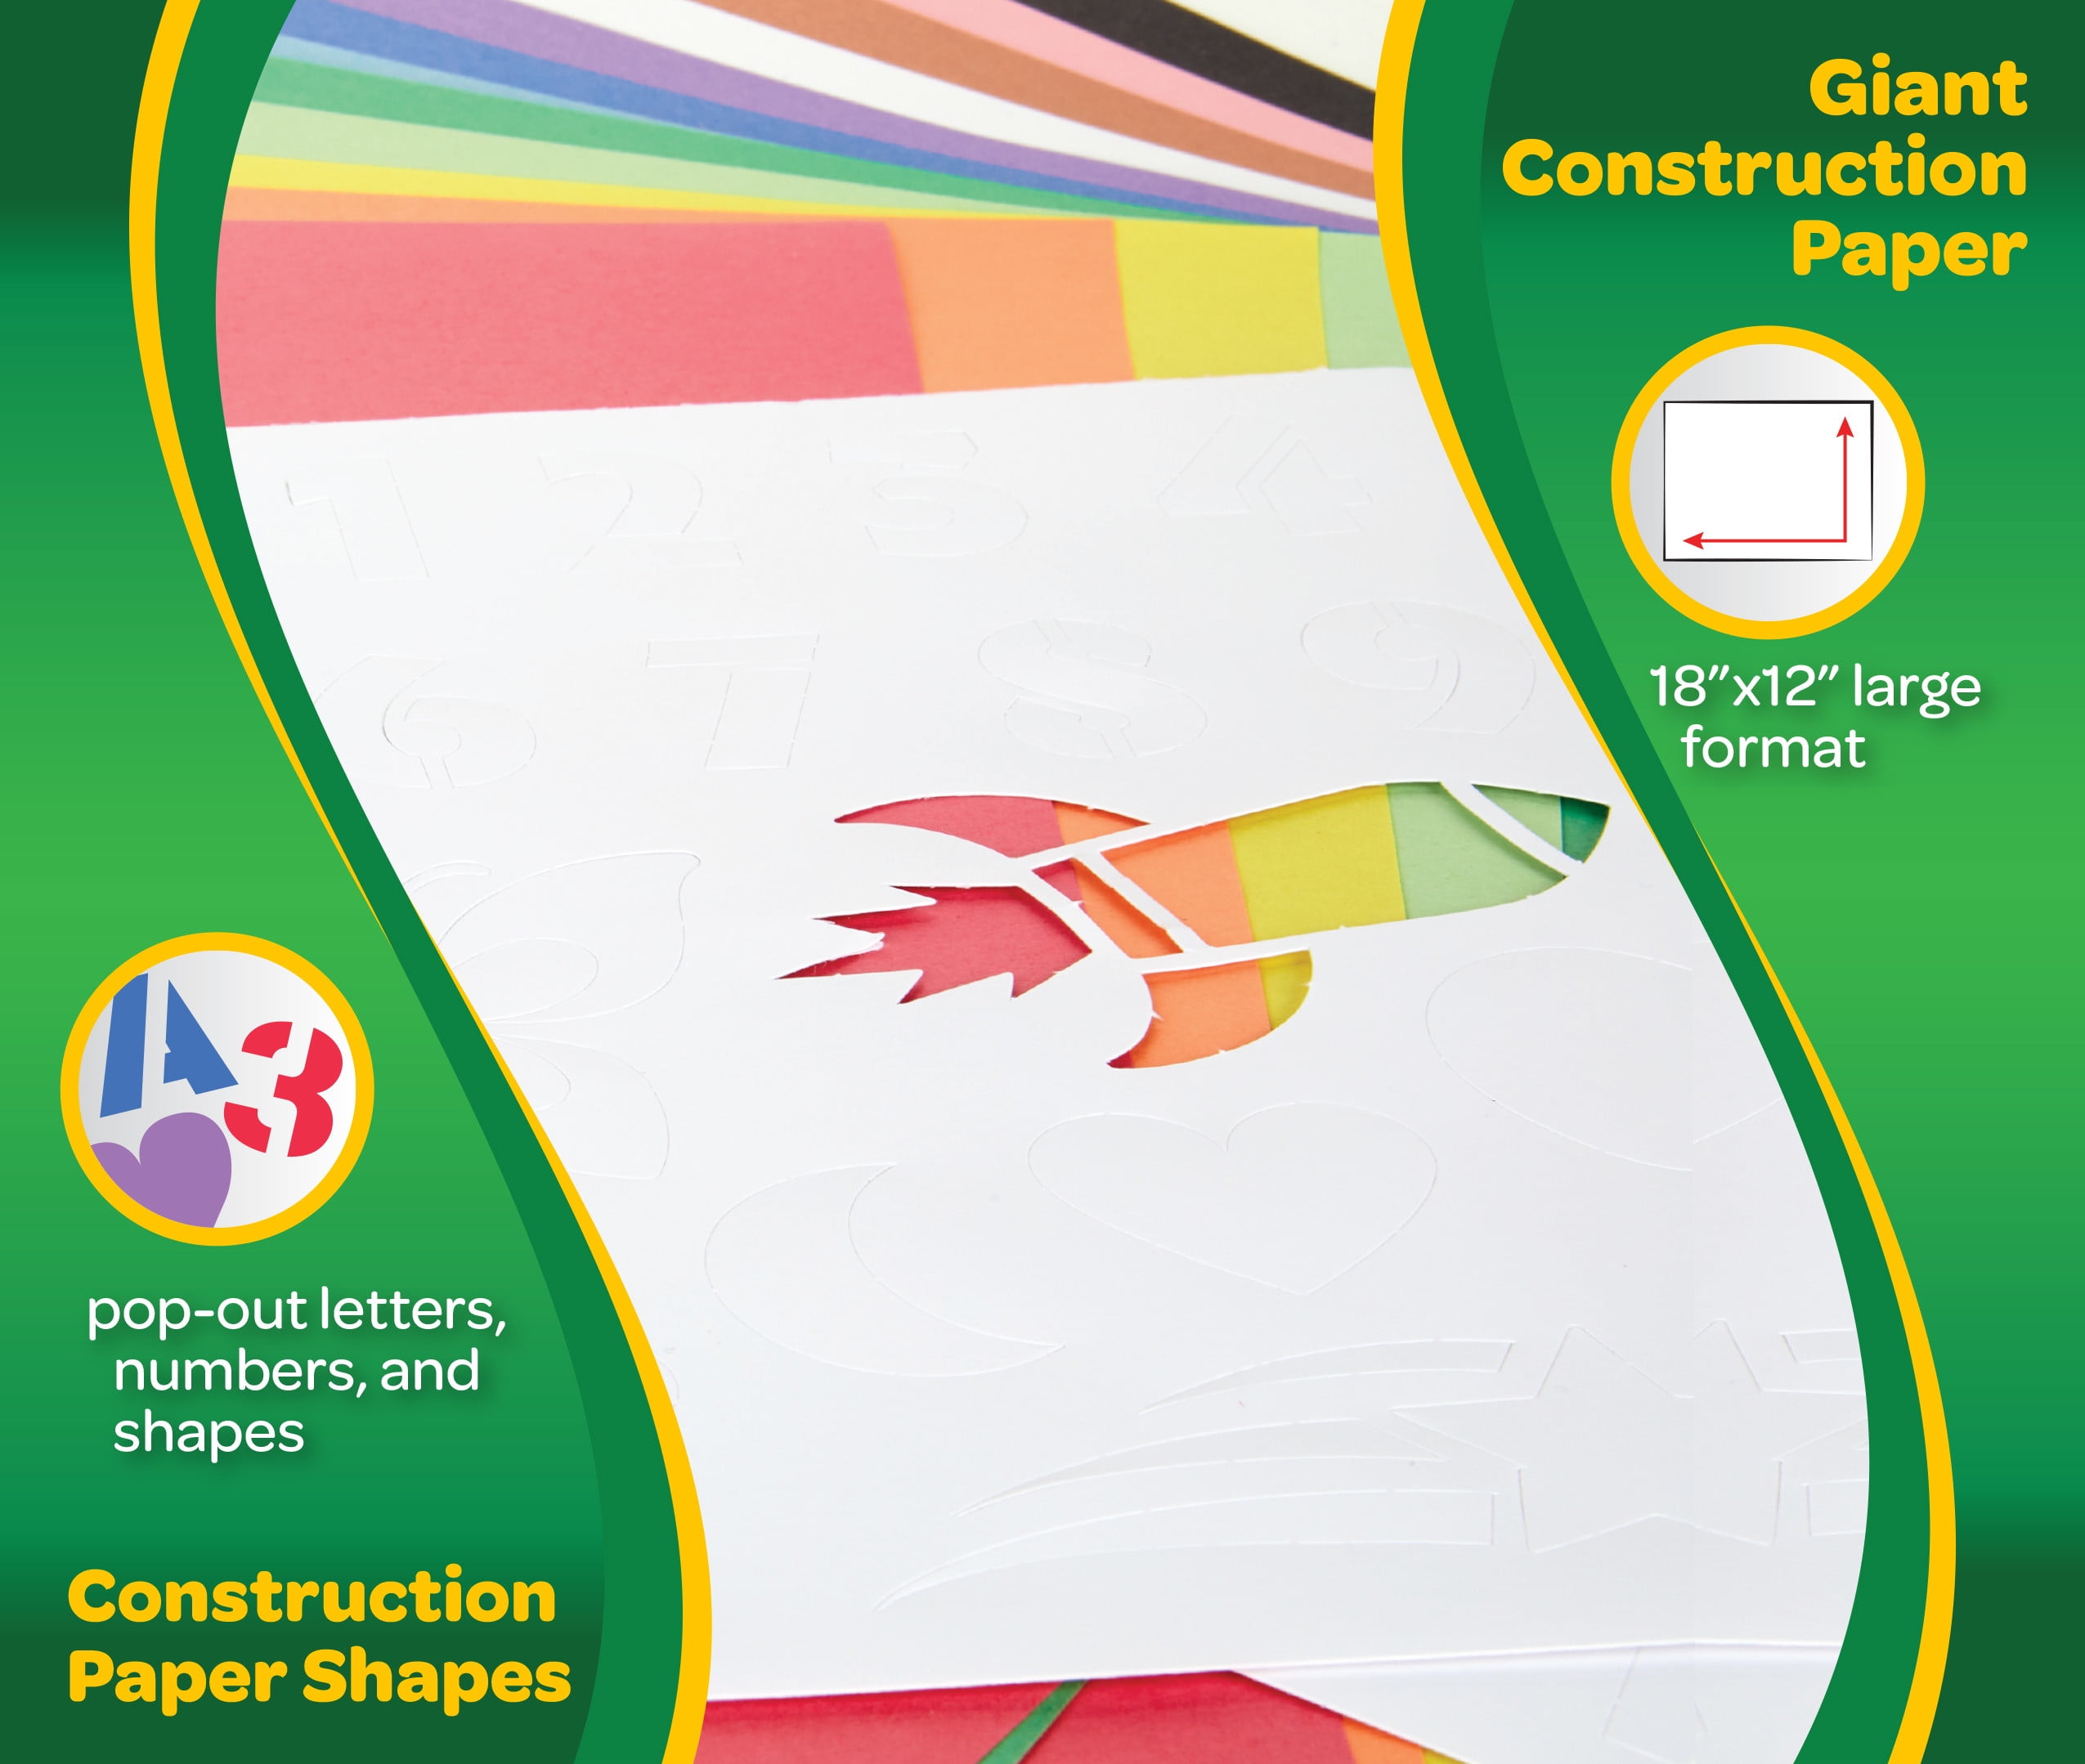 Construction Paper Bulk Value Pack - Art & Craft from Early Years